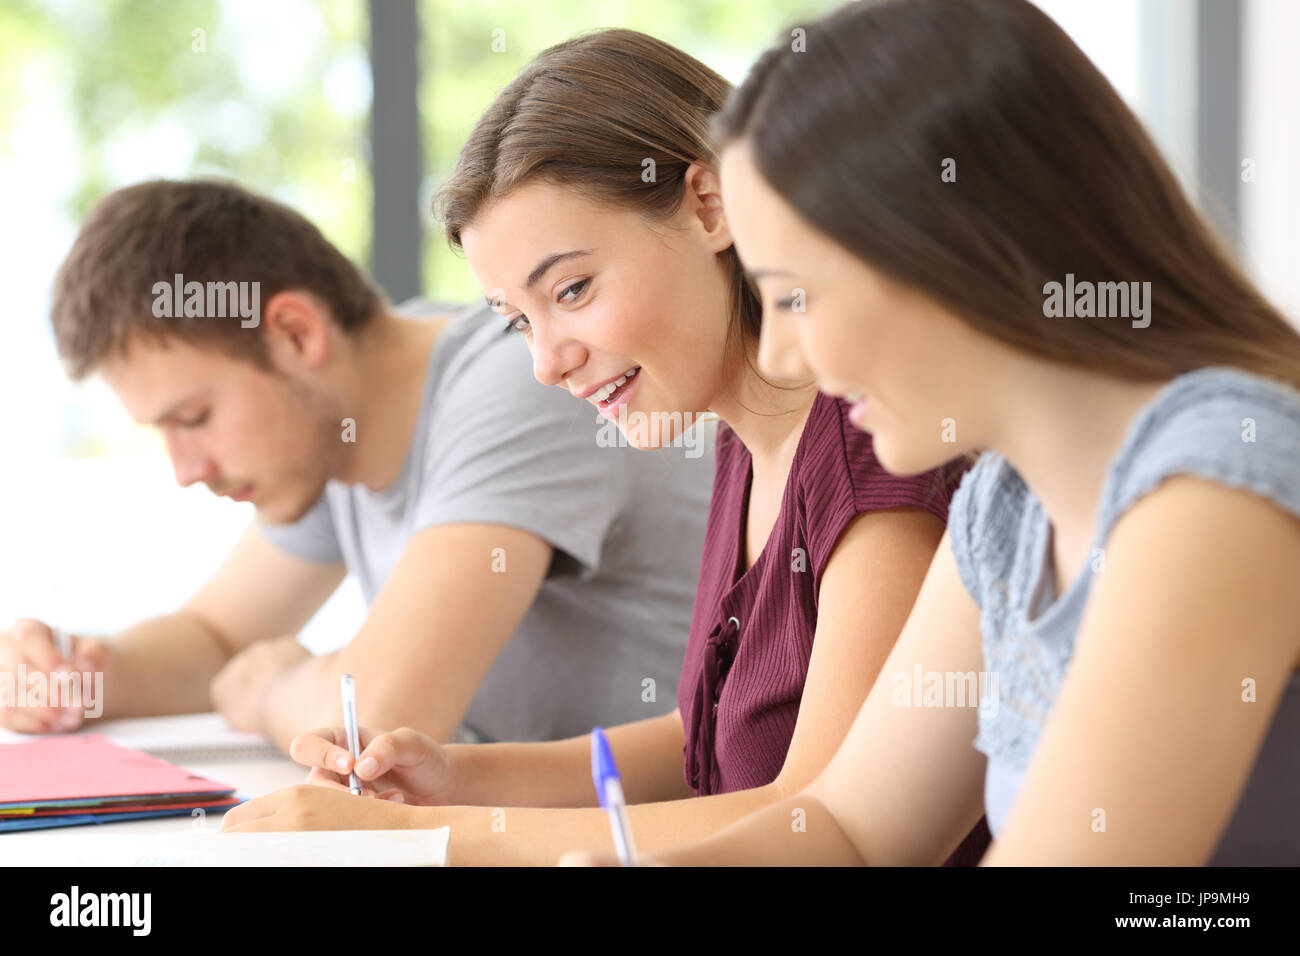 Two classmates talking during a class in a classroom Stock Photo